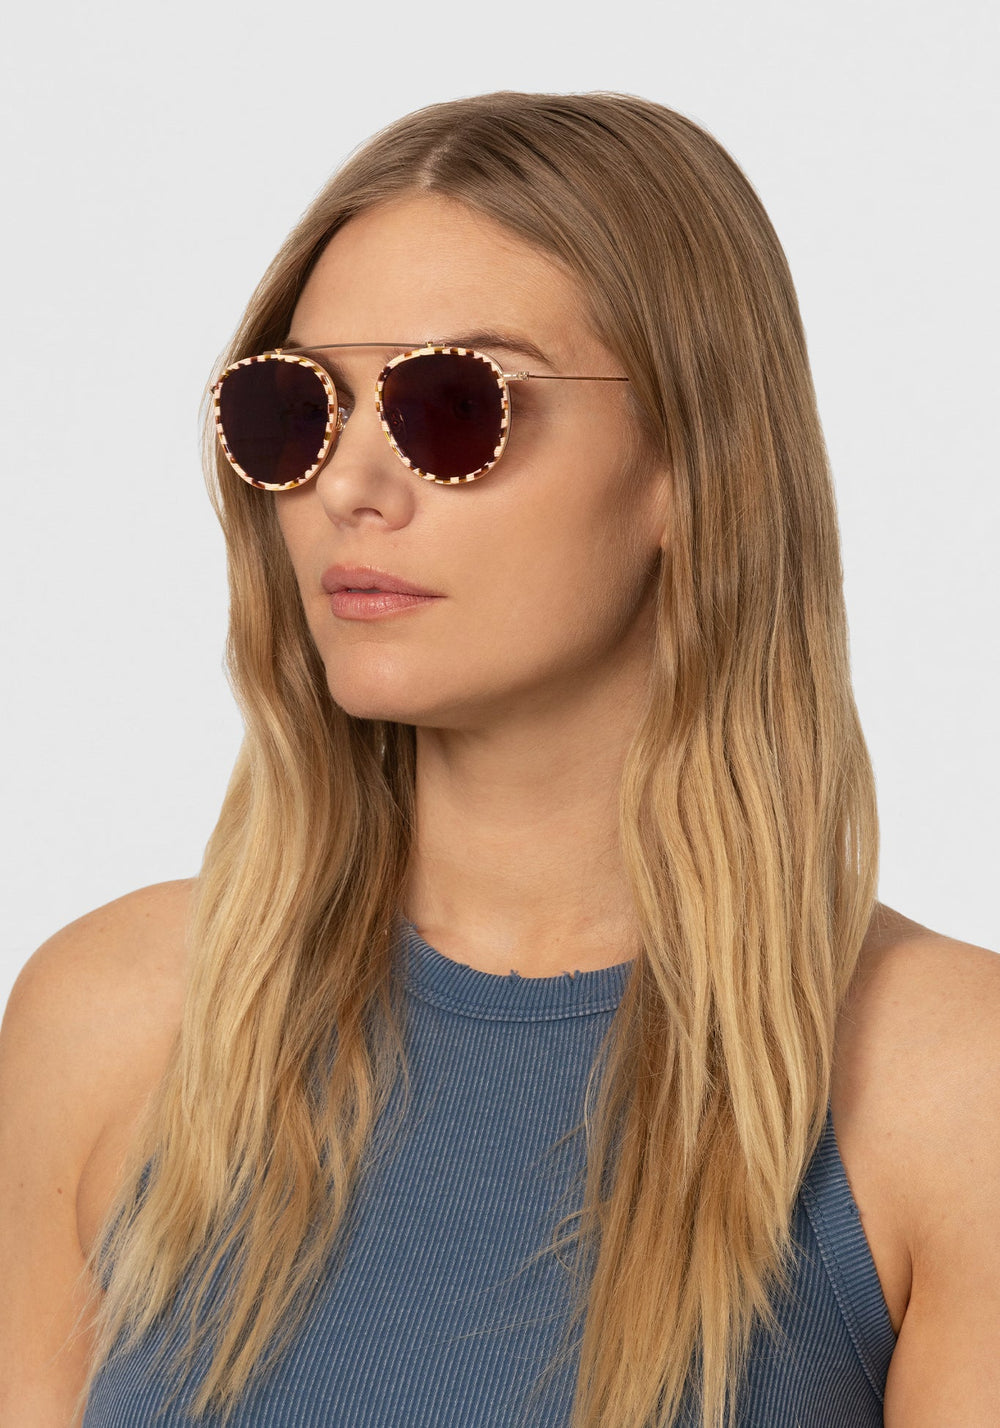 KREWE - Designer Single Bar Aviator Sunglasses - CHARTRES | Caffe Dolce 18K Handcrafted, luxury brown and white checkered acetate sunglasses. Similar to Oliver Peoples sunglasses, moscot sunglasses womens model | Model: Maritza